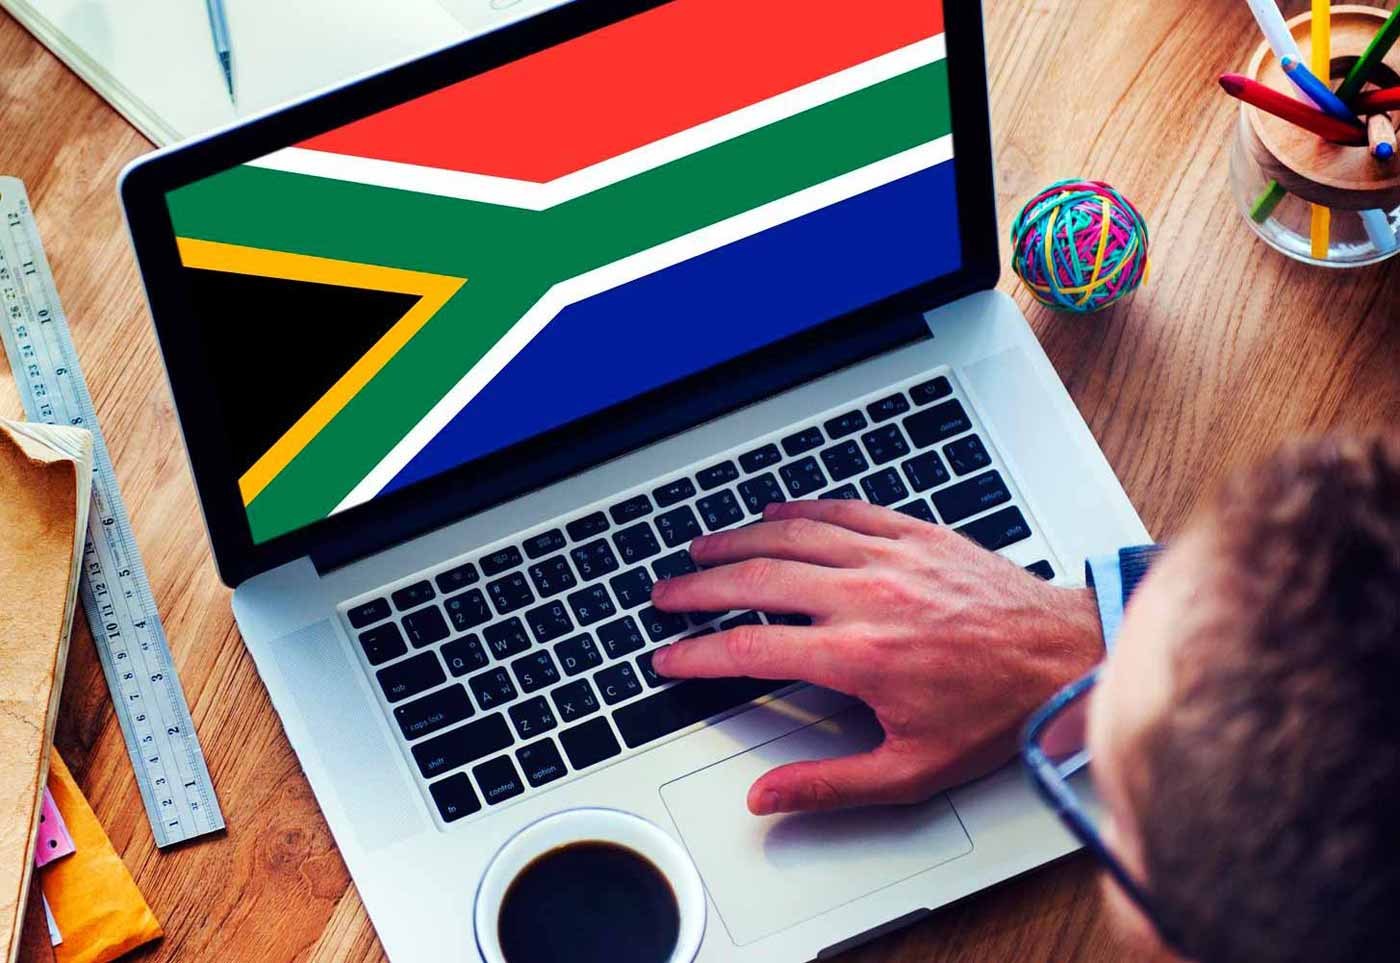 South Africa online gambling laws